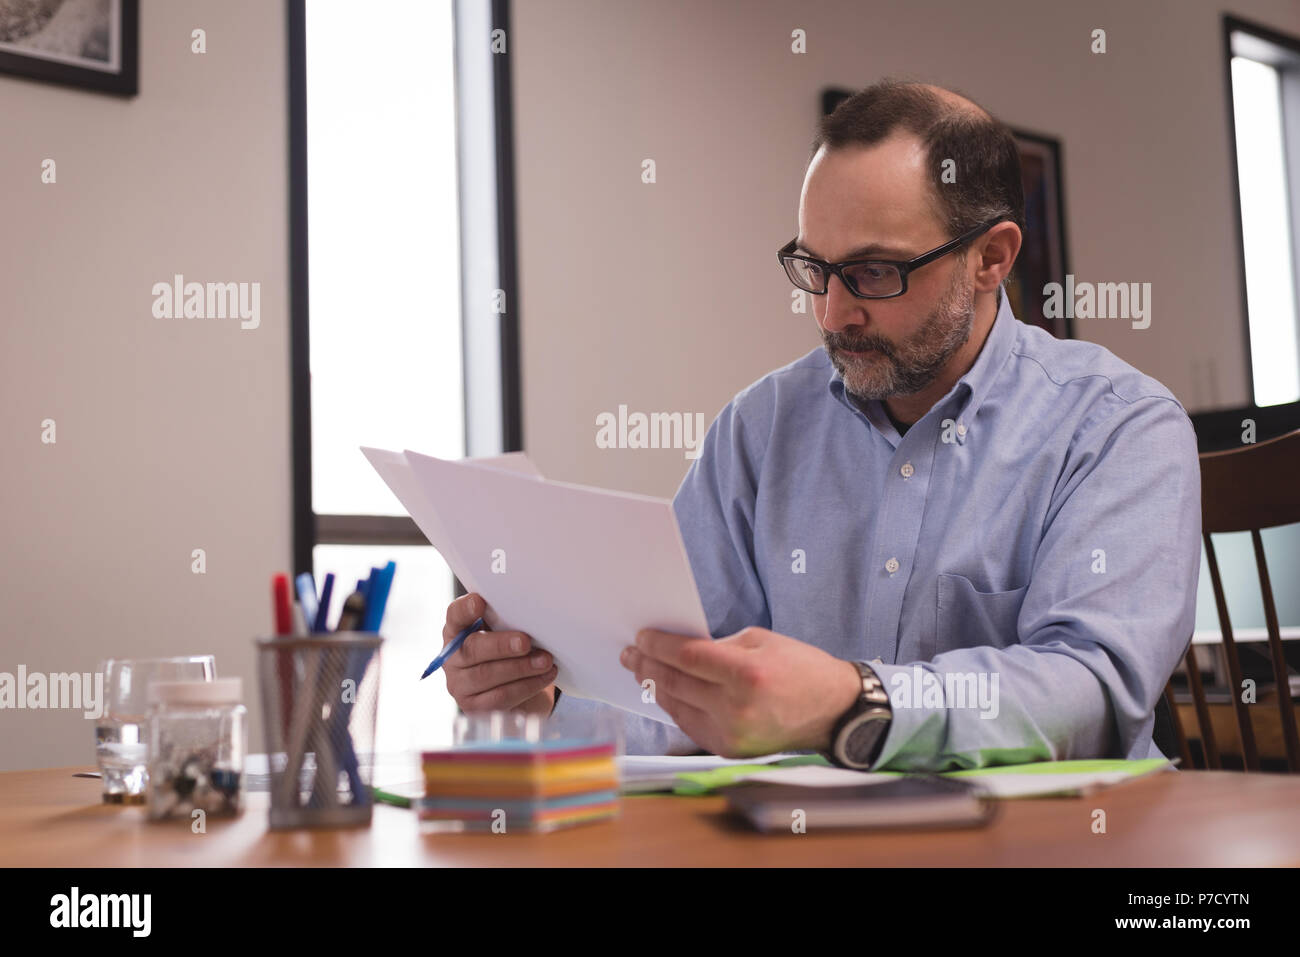 Male executive looking at documents Stock Photo